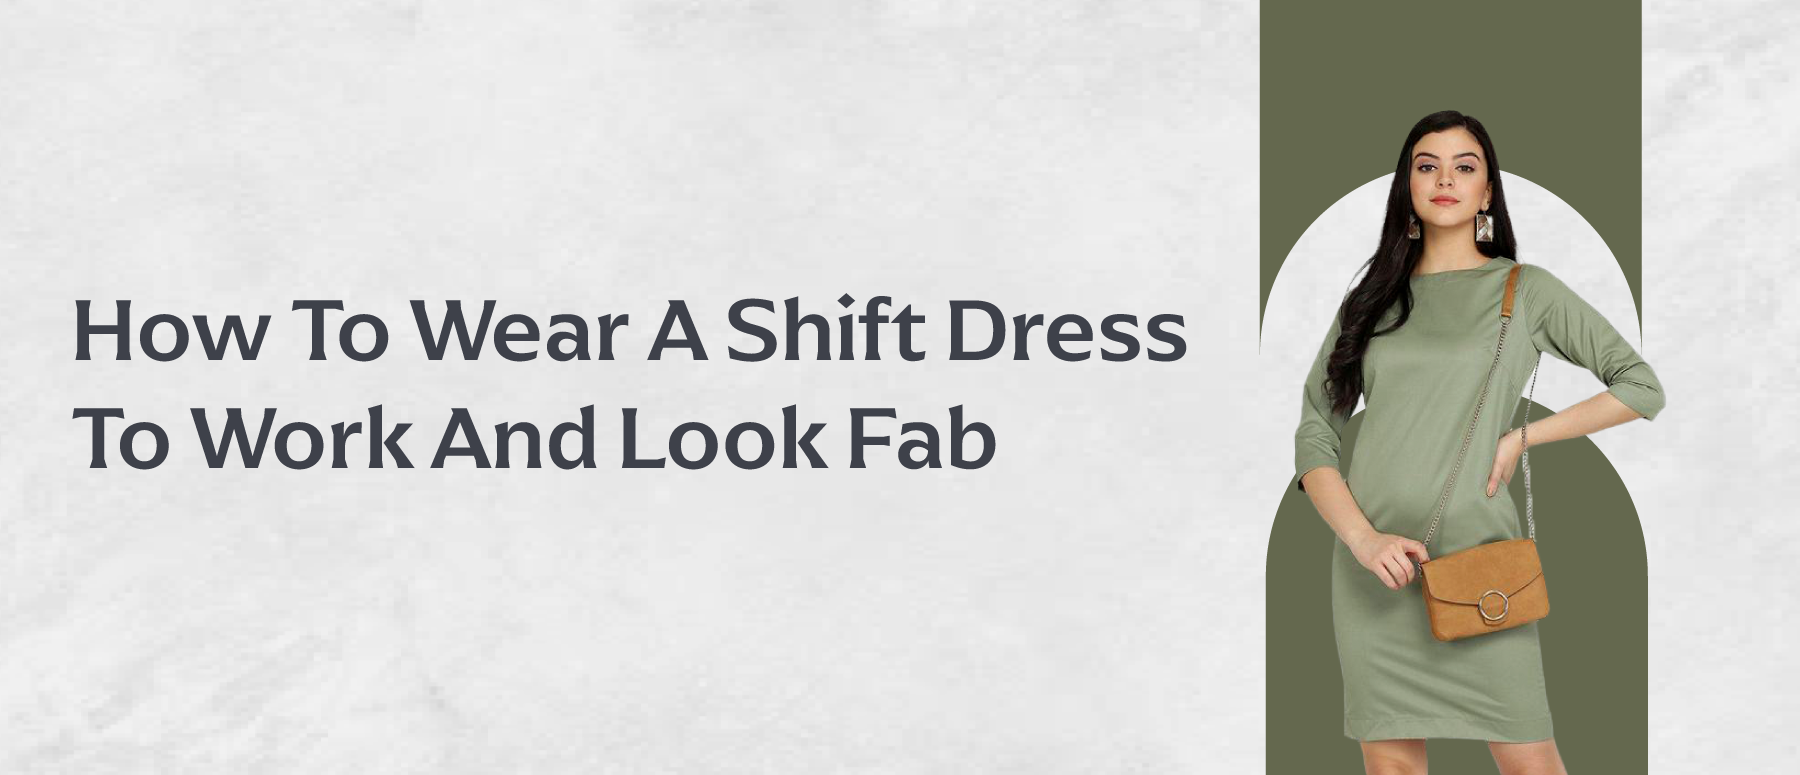 Six fun ways to wear a dress clip - Cause A Frockus » Cause A Frockus